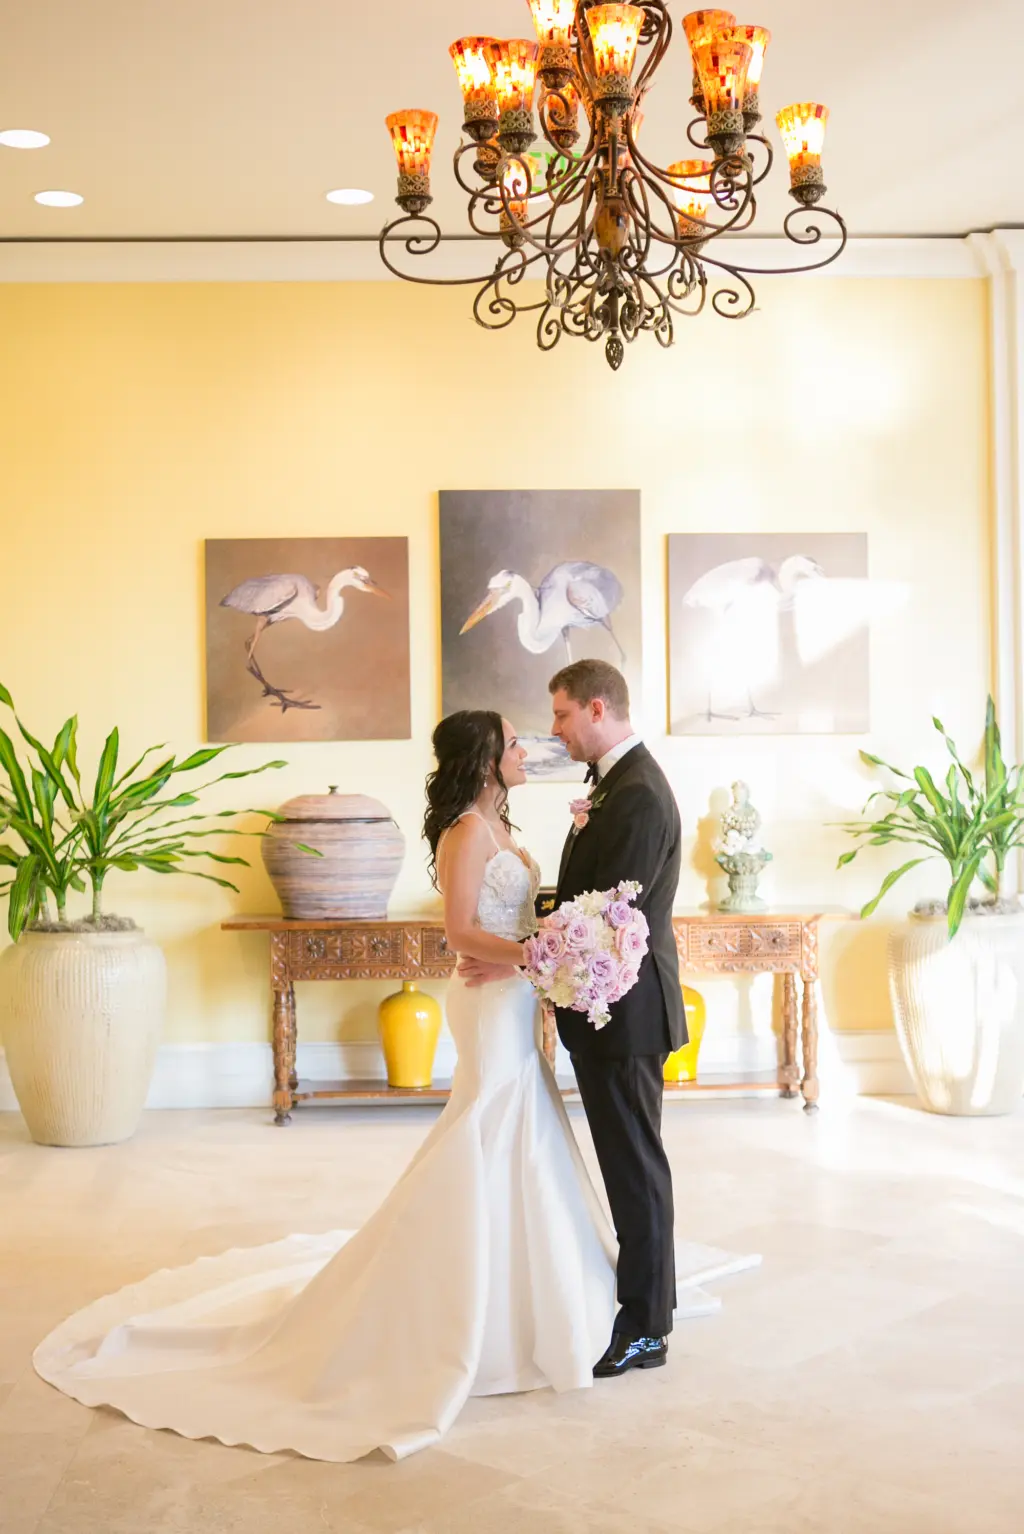 Intimate Bride and Groom Wedding Portrait | White Removable Spaghetti Strap Lace and Satin Mermaid Wedding Dress with Cathedral Train Inspiration | Tampa Bay Boutique Truly Forever Bridal